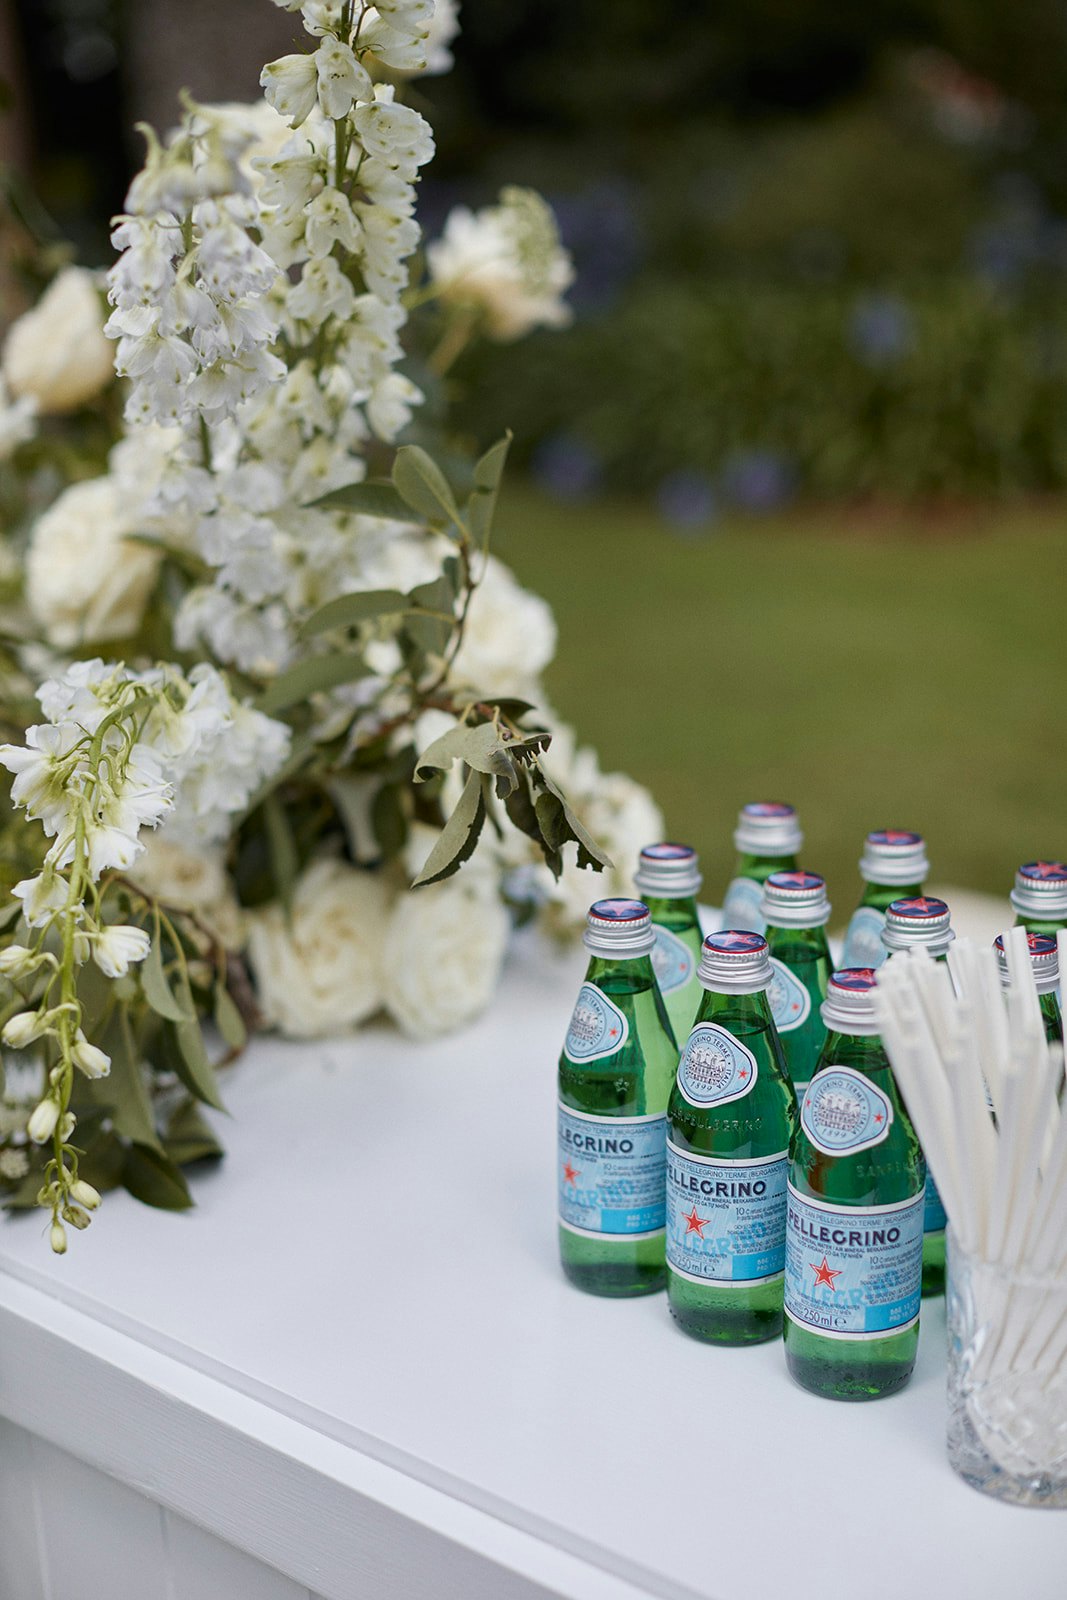 Sparkling water next to flowers